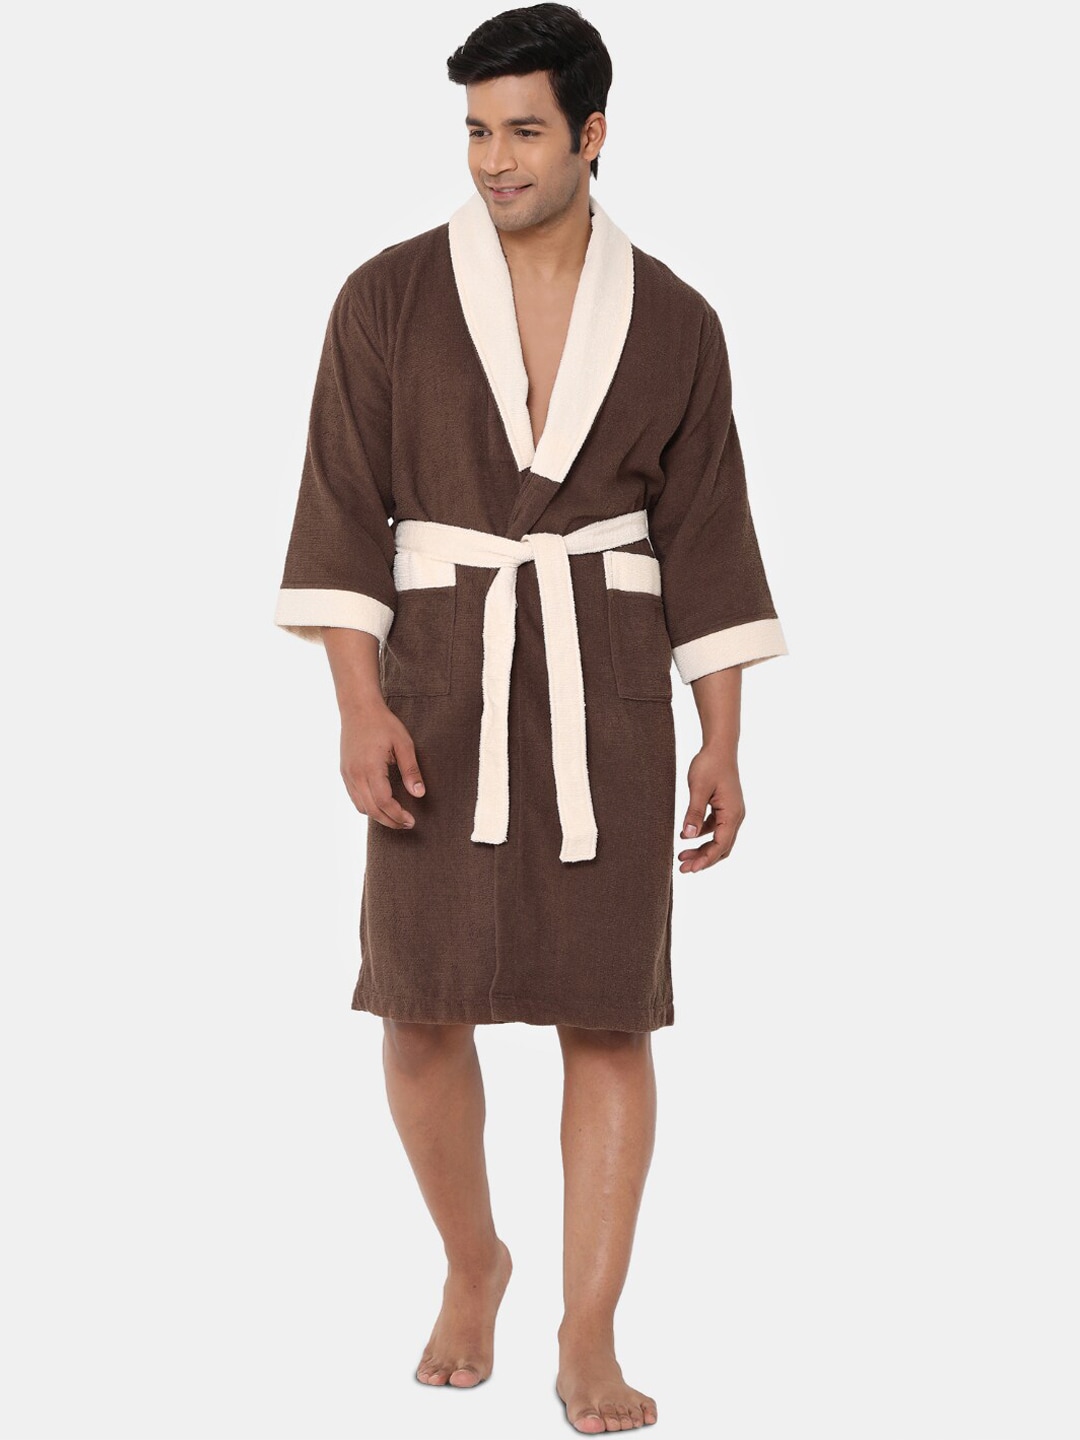 SPACES Unisex Brown Solid 100% Cotton Bath Robe Price in India